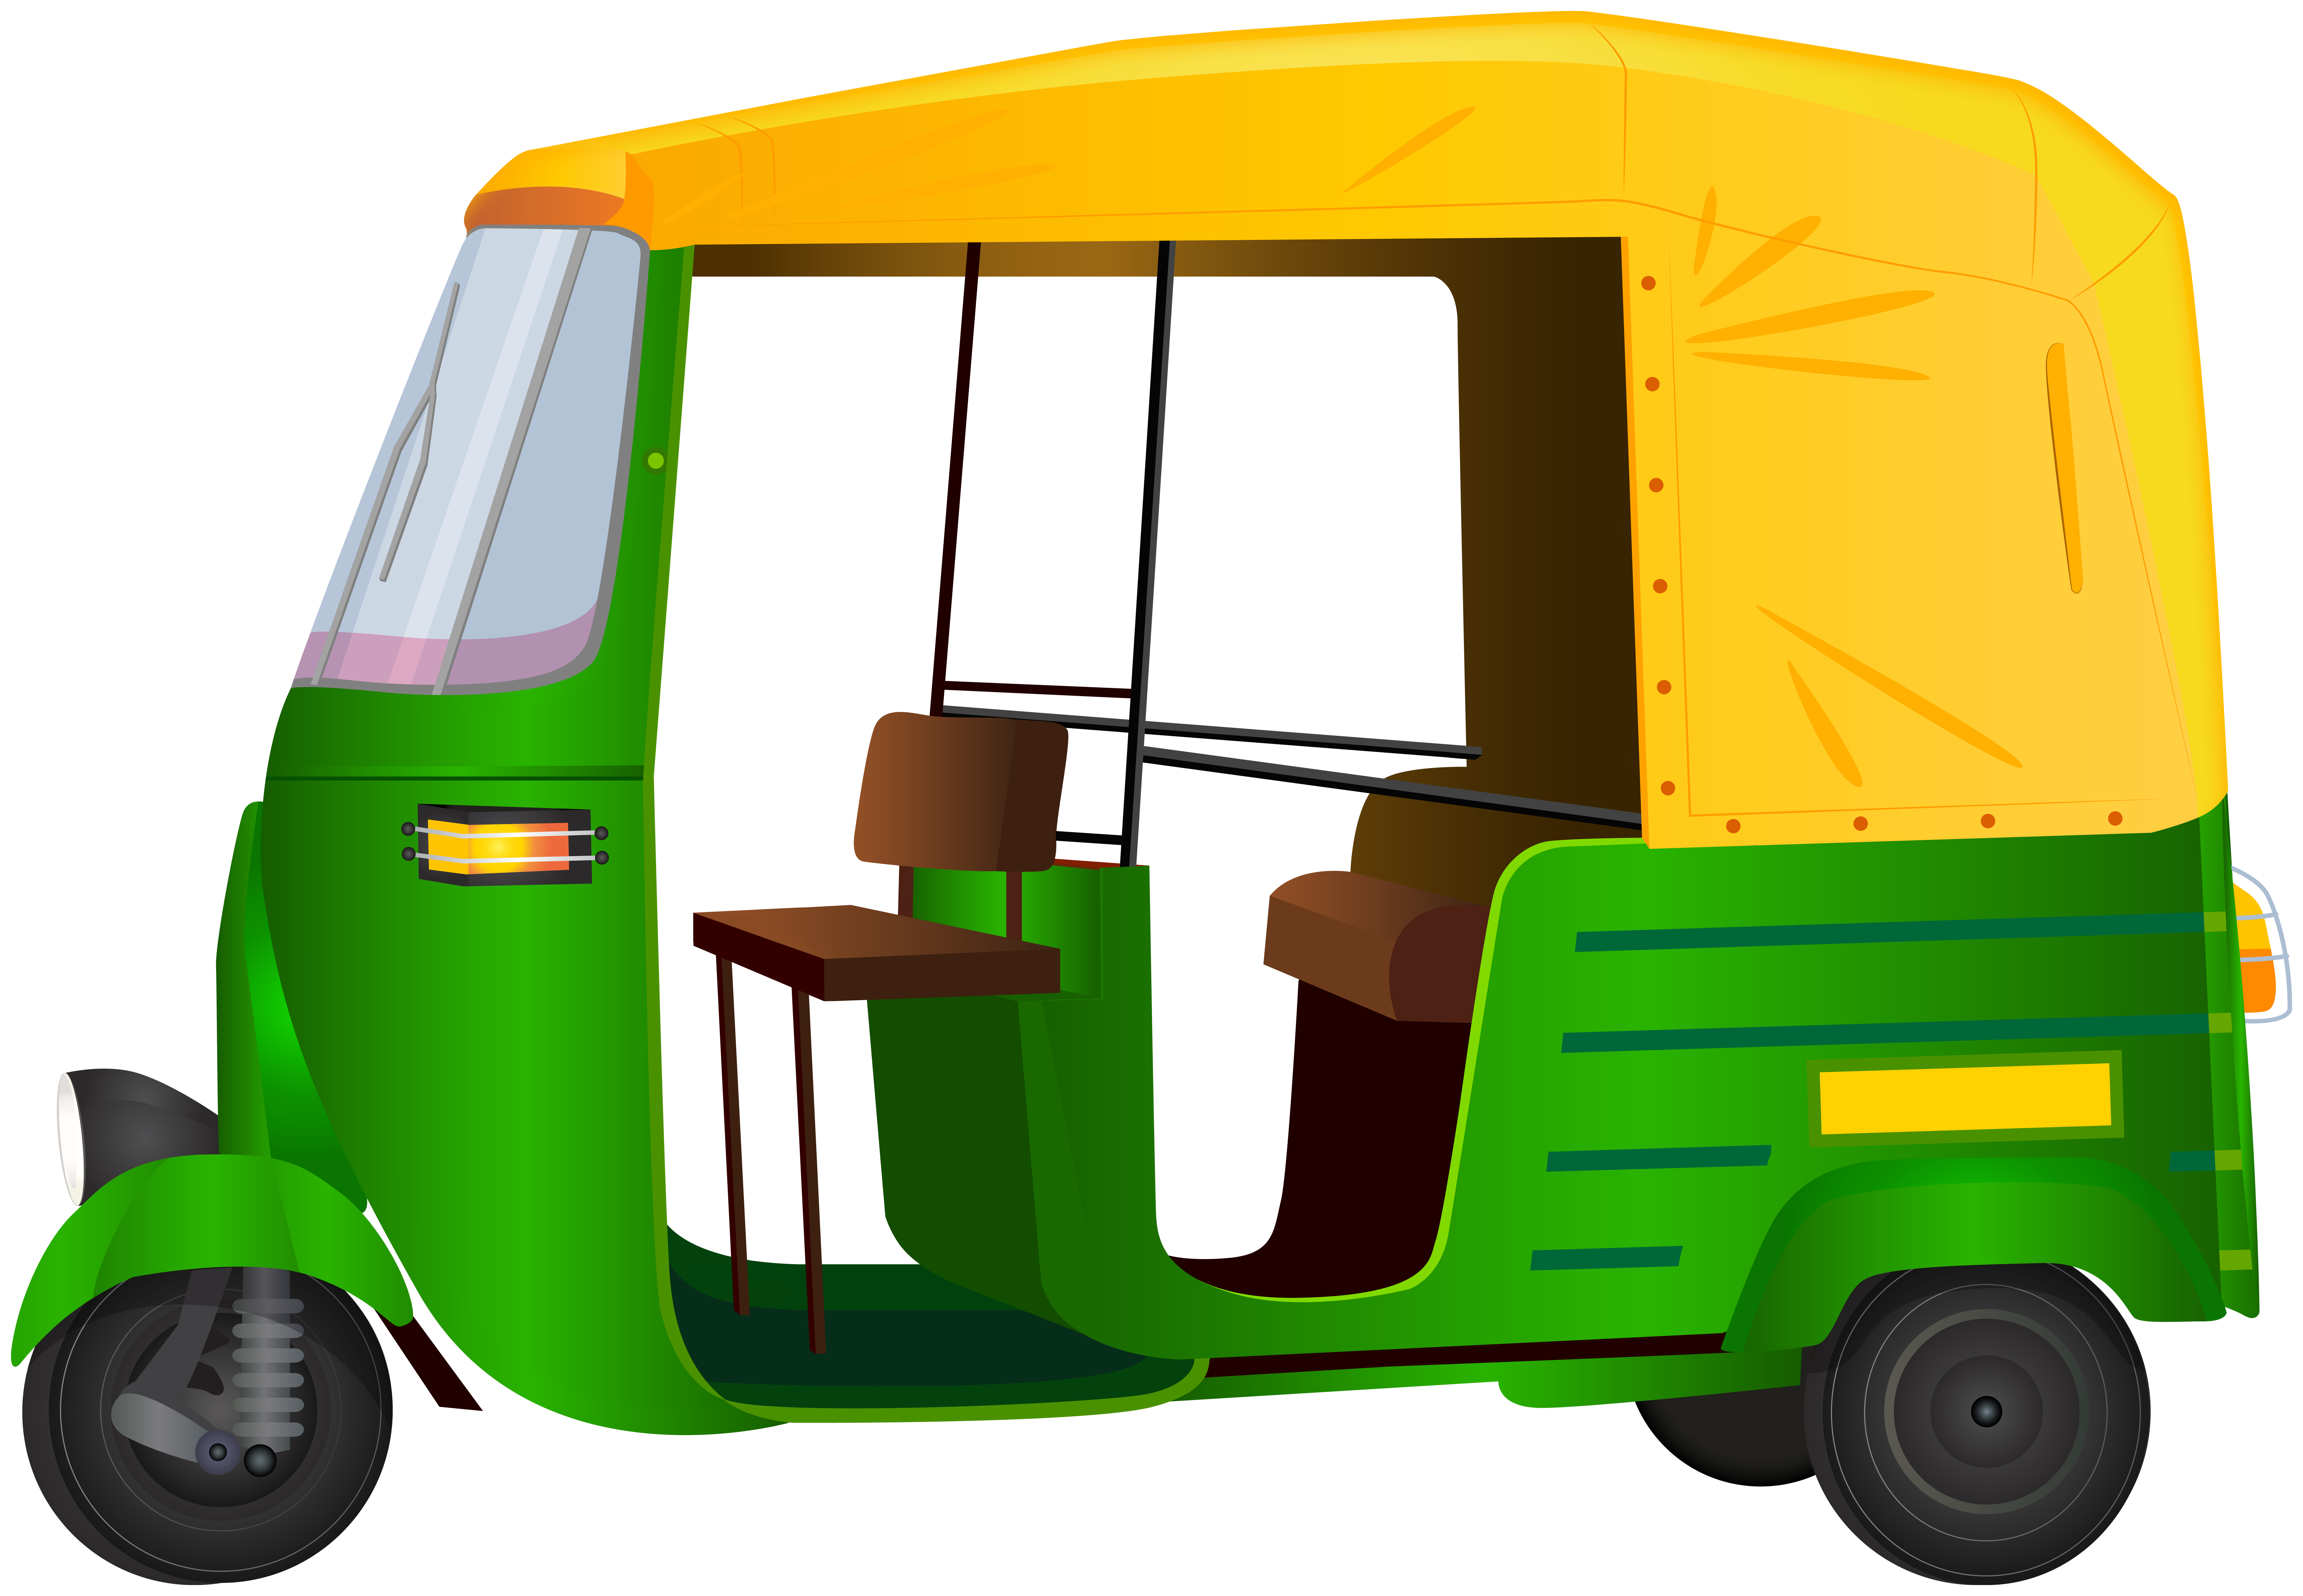 https://gallery.yopriceville.com/var/albums/Free-Clipart-Pictures/India-PNG/India_Auto_Rickshaw_Clip_Art_Image.png?m=1545181753